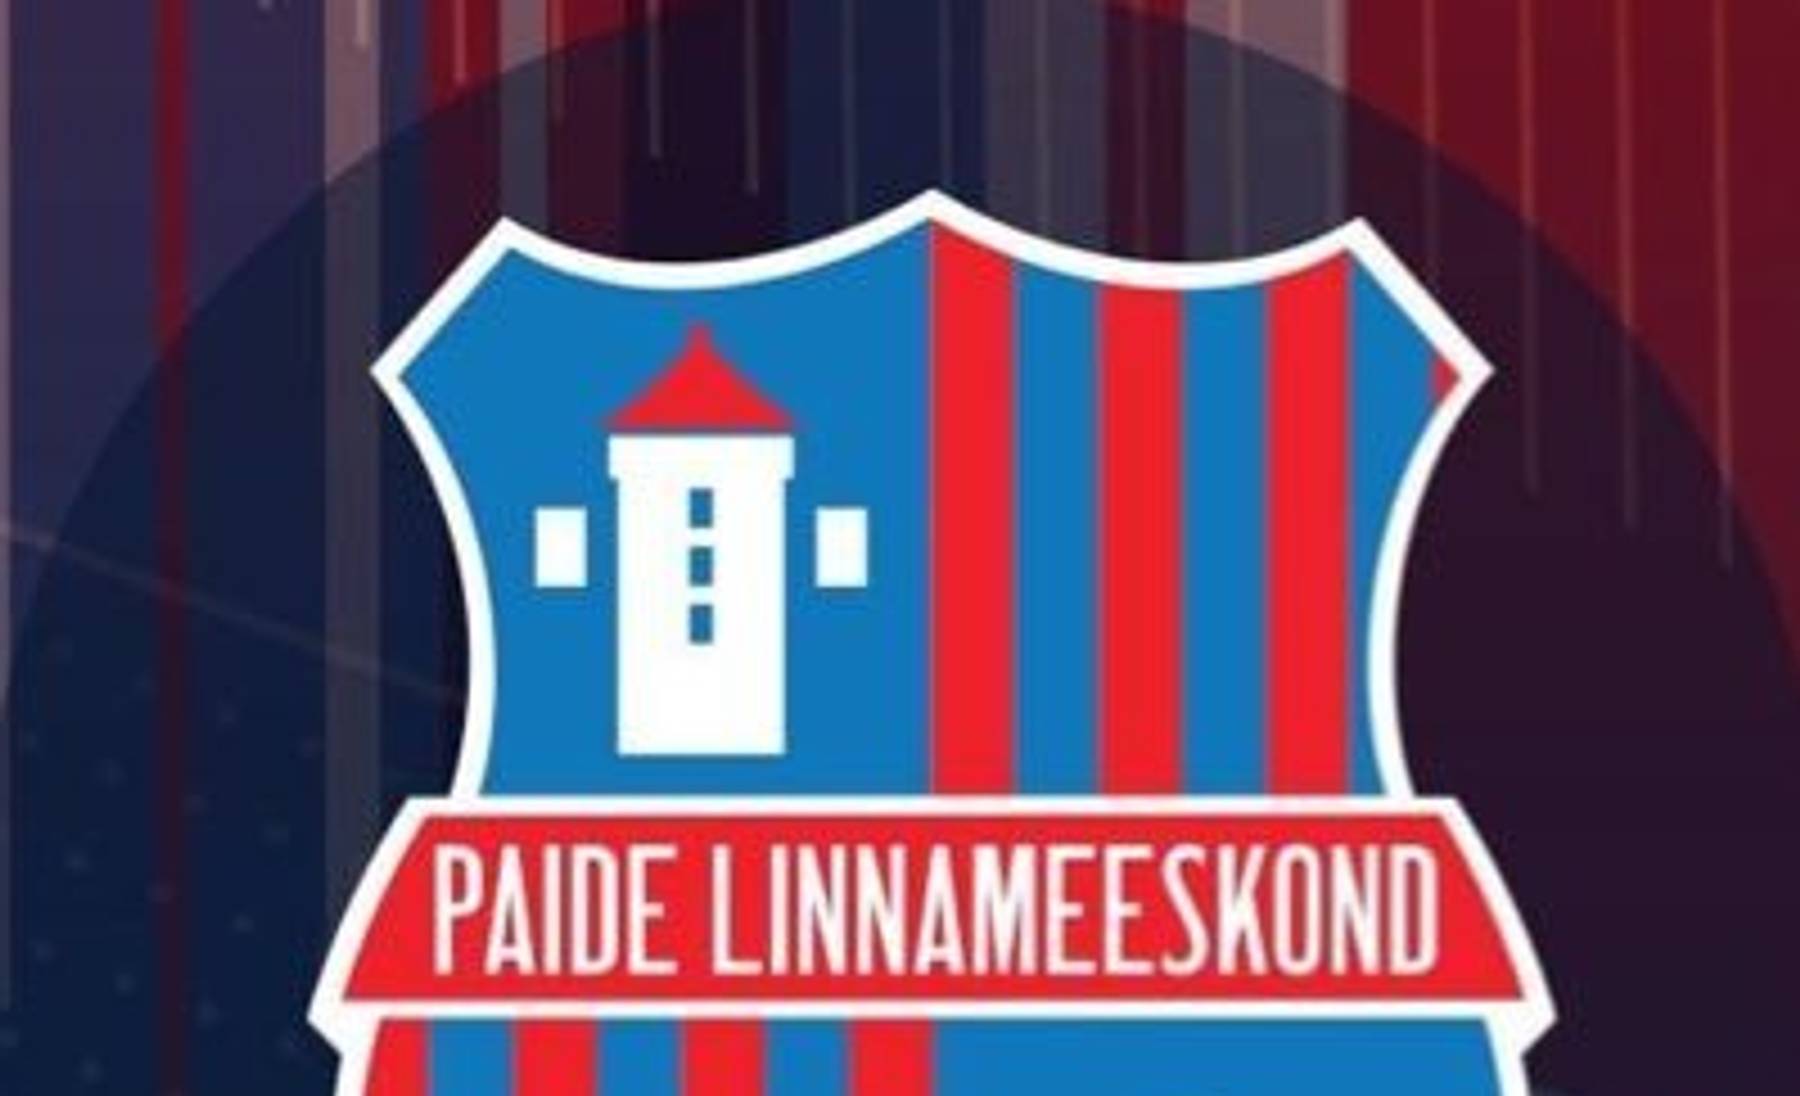 Paide logo